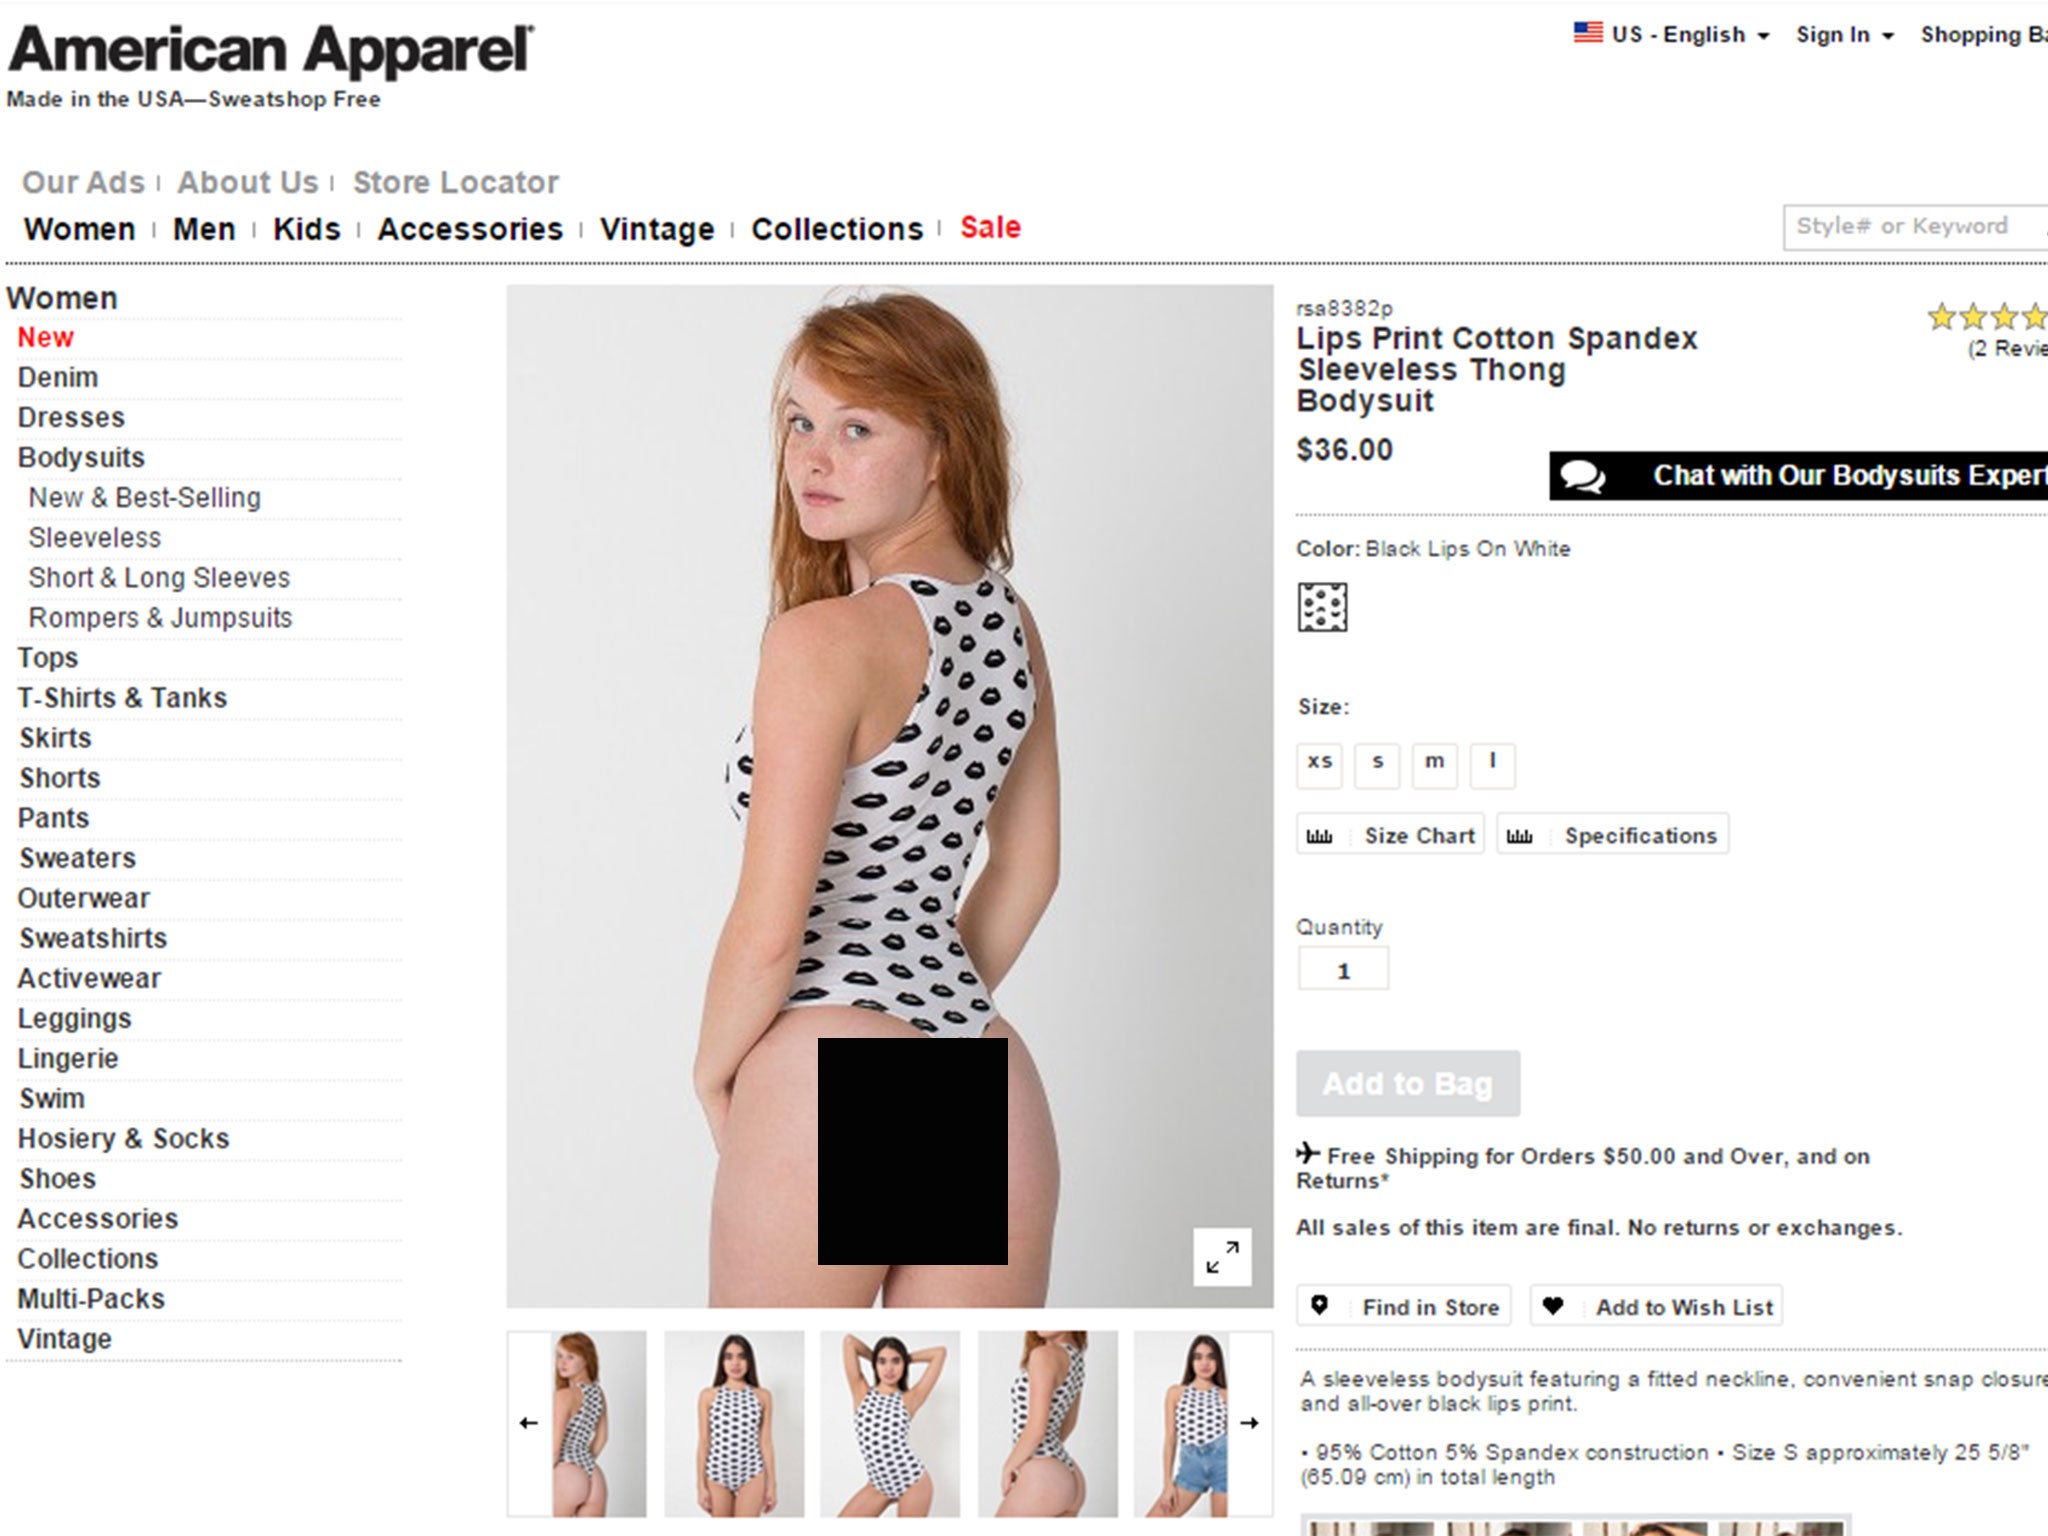 Another American Apparel ad gets banned